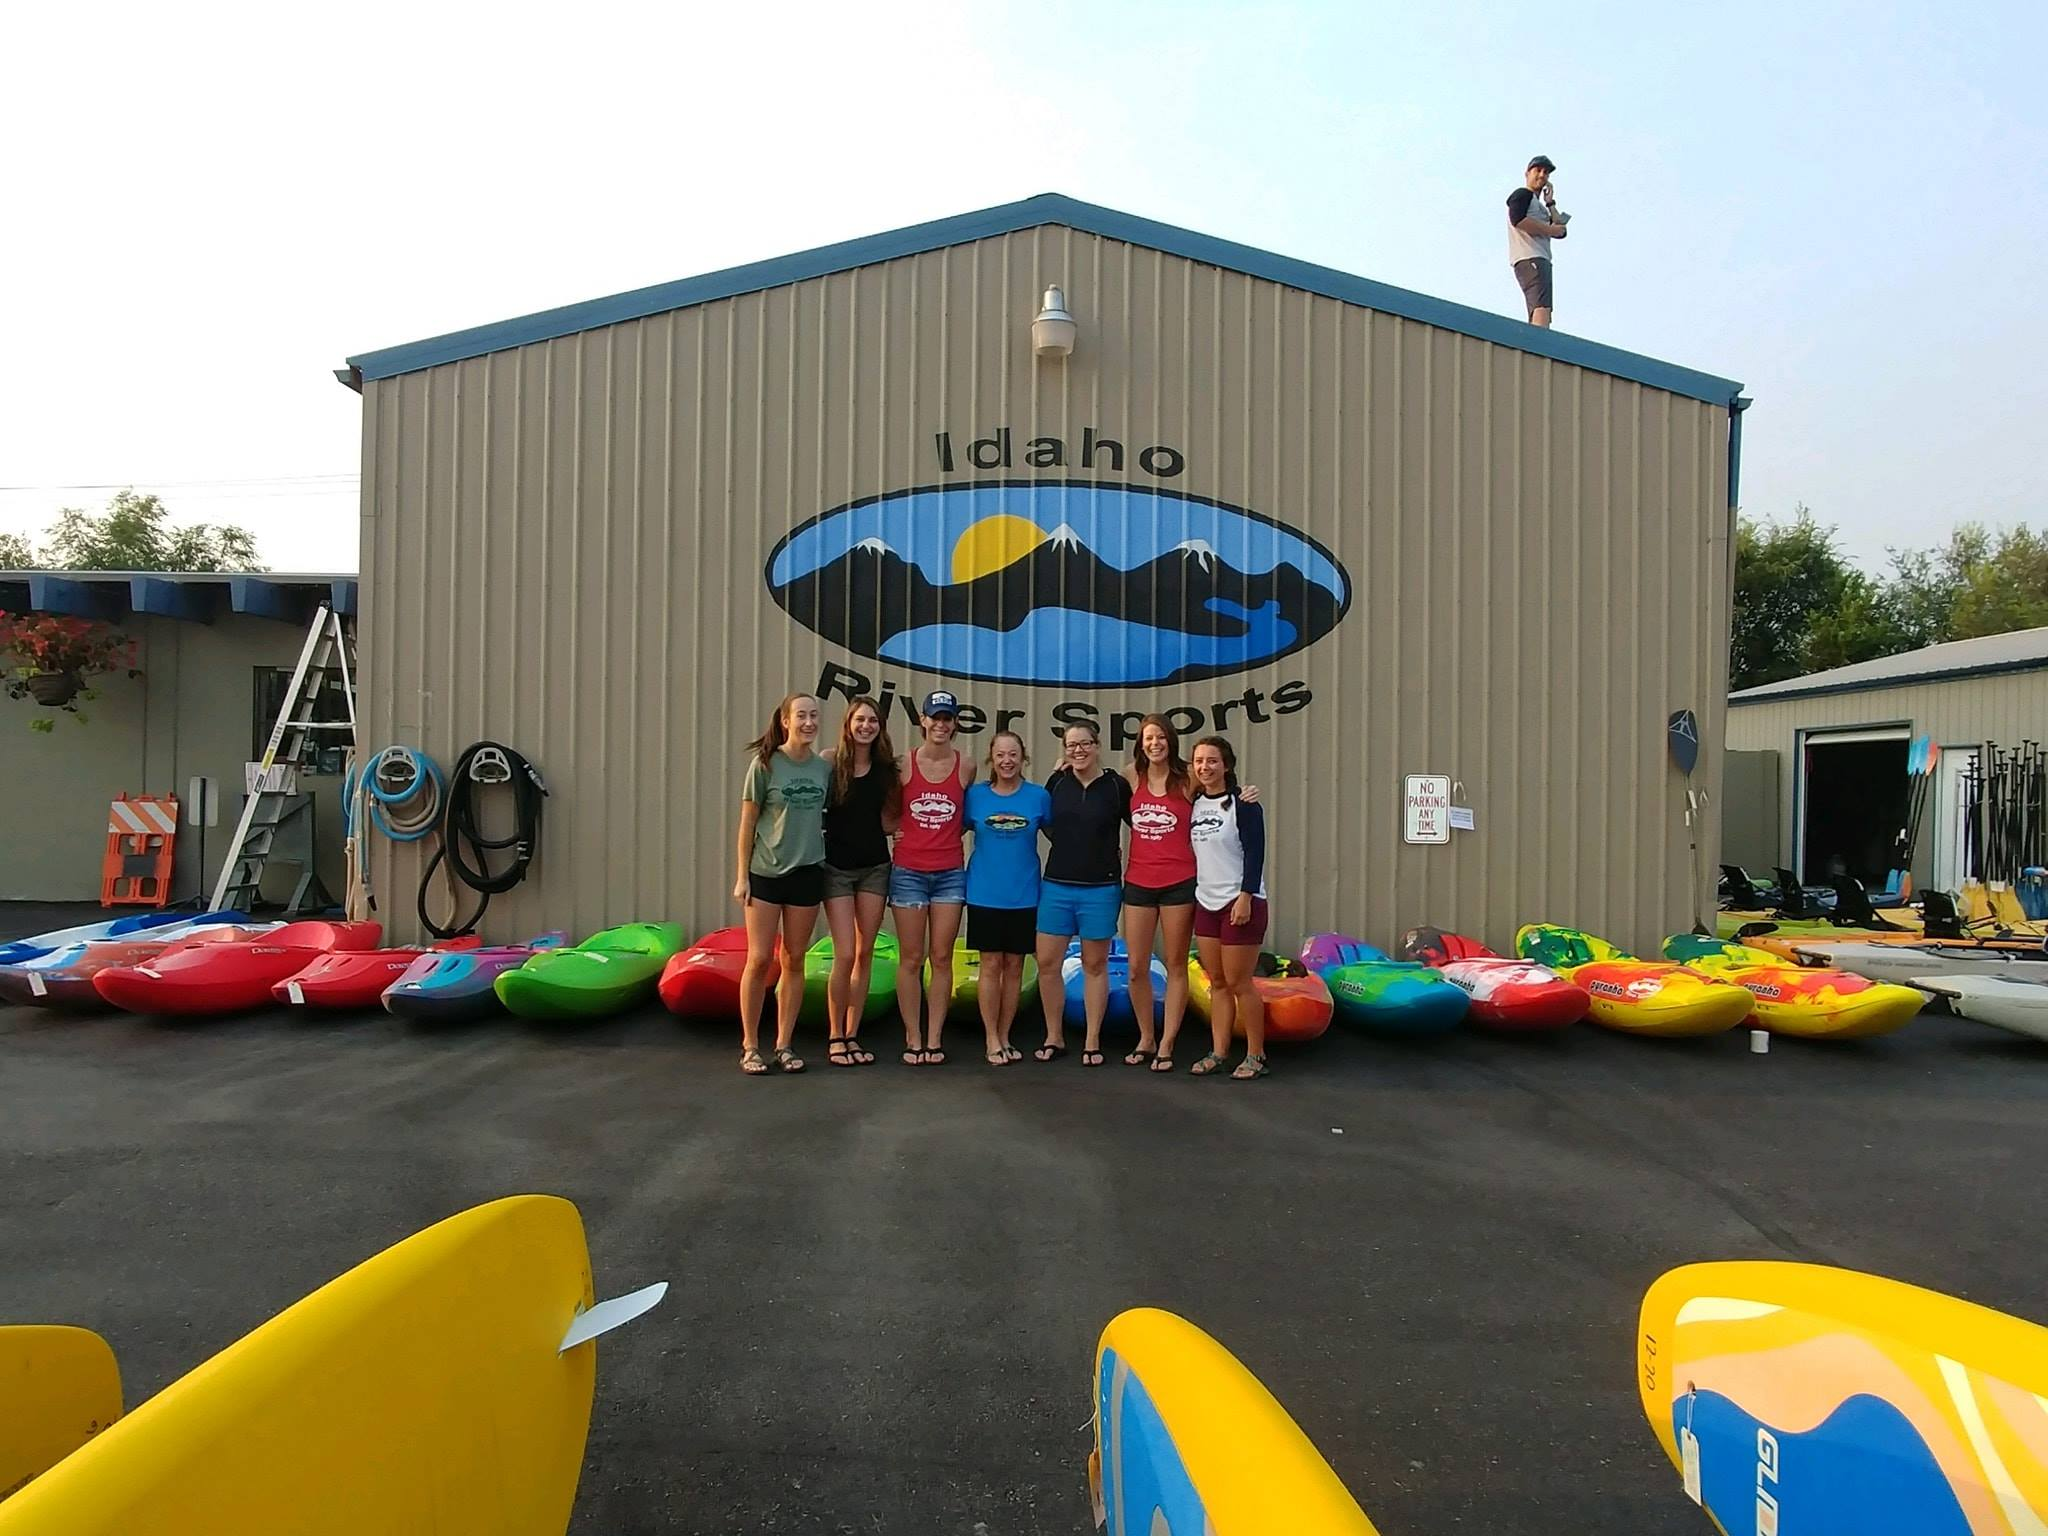 inflatable boards and a multi person paddle board